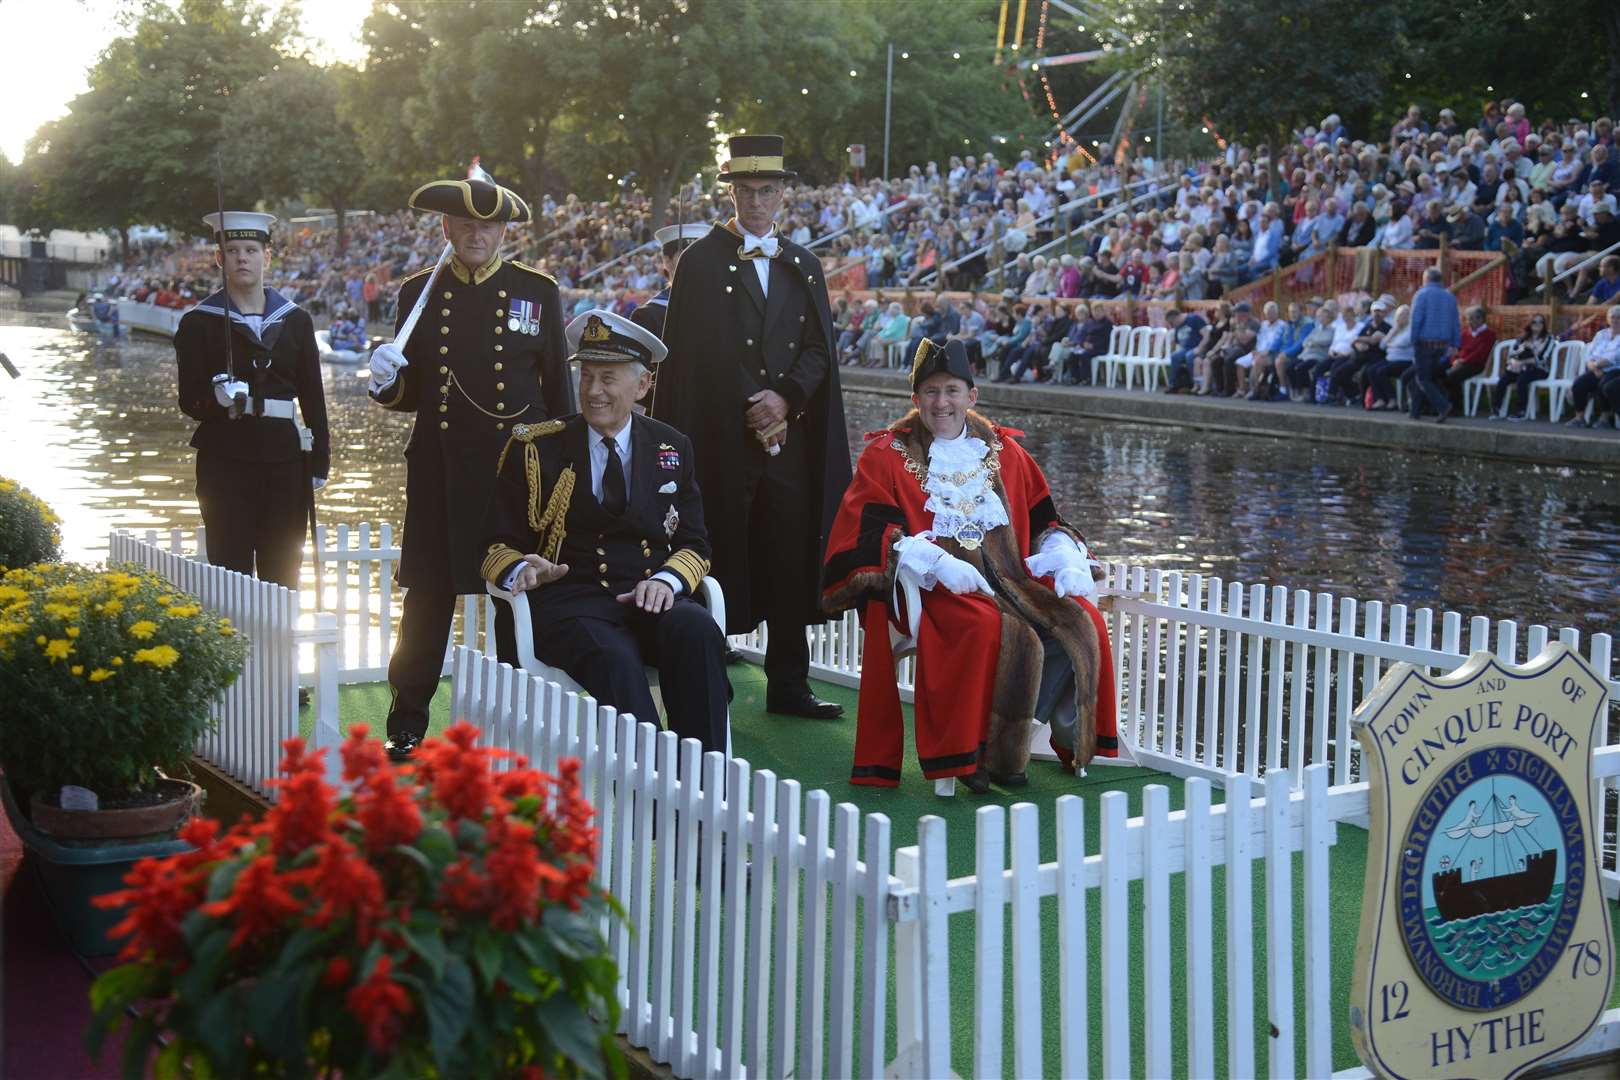 Mayor of Hythe Paul Peacock and Admiral Lord Boyce on the Cinque Ports float2017 Hythe Venetian FeteRoyal Military CanalPicture: Gary Browne FM4887960 (1566396)